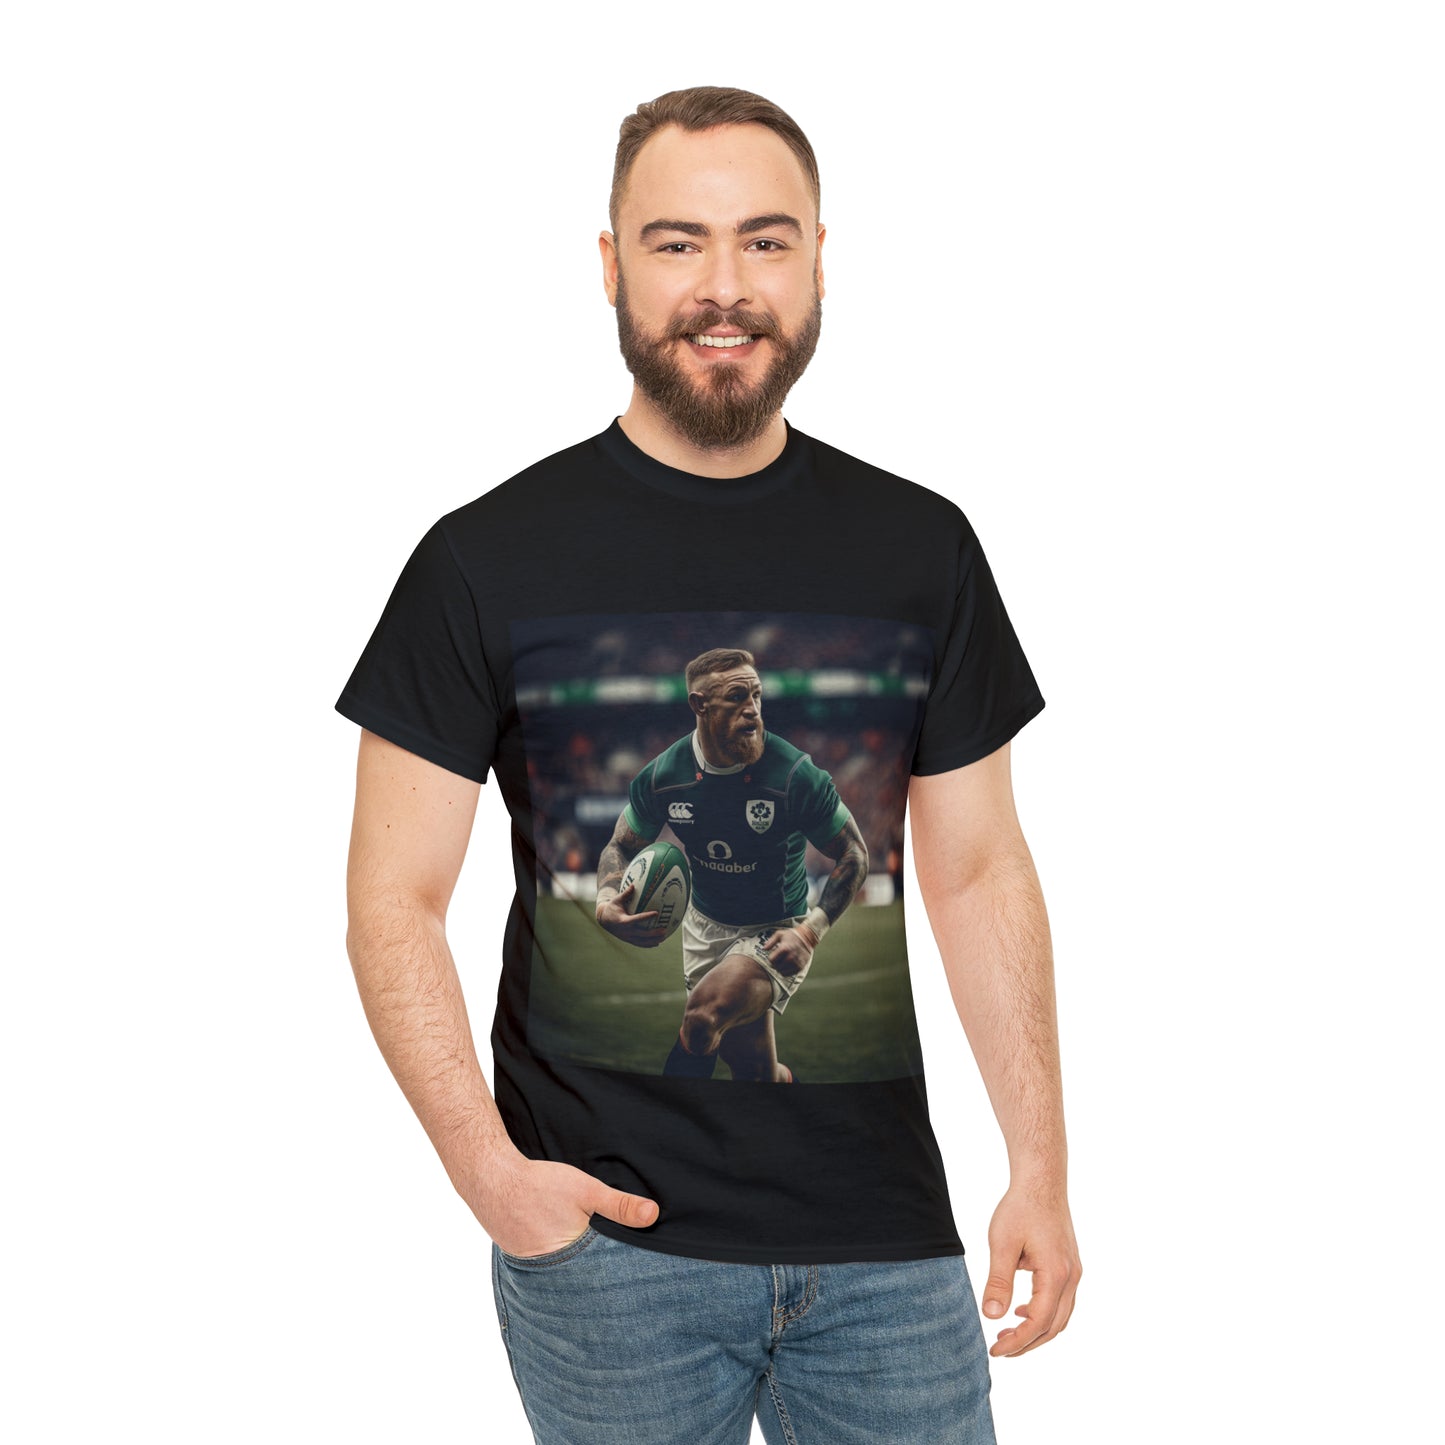 Conor Rugby - dark shirts